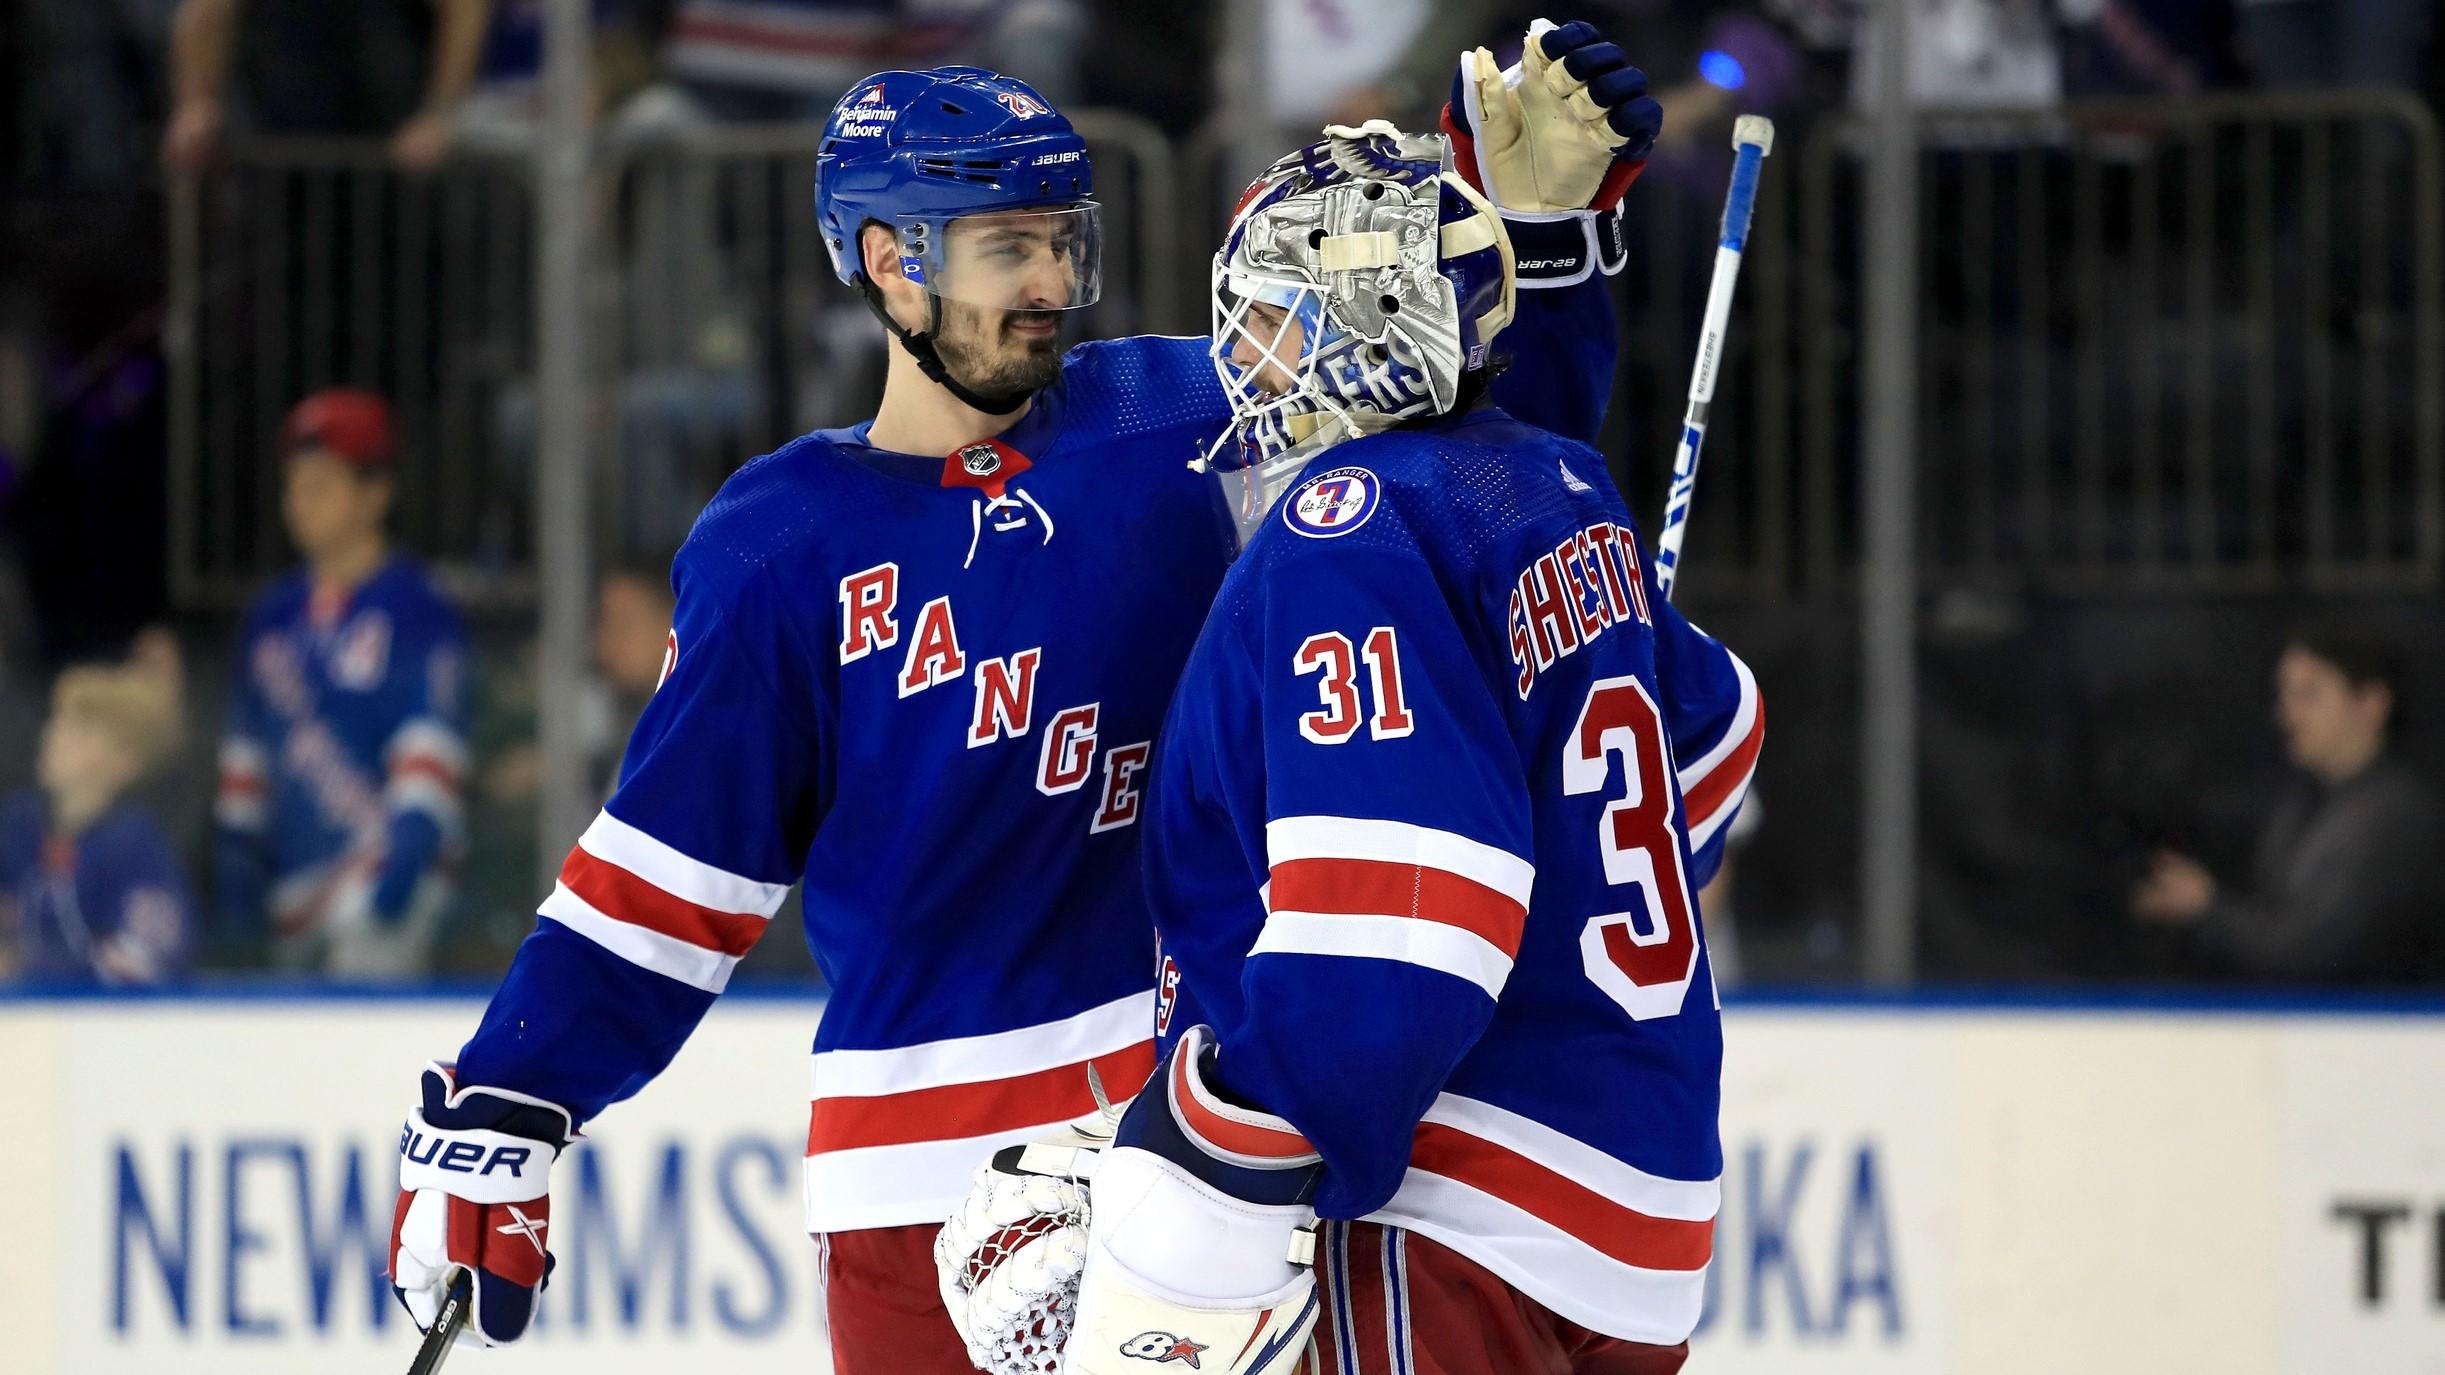 May 22, 2022; New York, New York, USA; New York Rangers left wing Chris Kreider (20) celebrates a 3-1 win against the Carolina Hurricanes with New York Rangers goalie Igor Shesterkin (31) in game three of the second round of the 2022 Stanley Cup Playoffs at Madison Square Garden. / Danny Wild-USA TODAY Sports